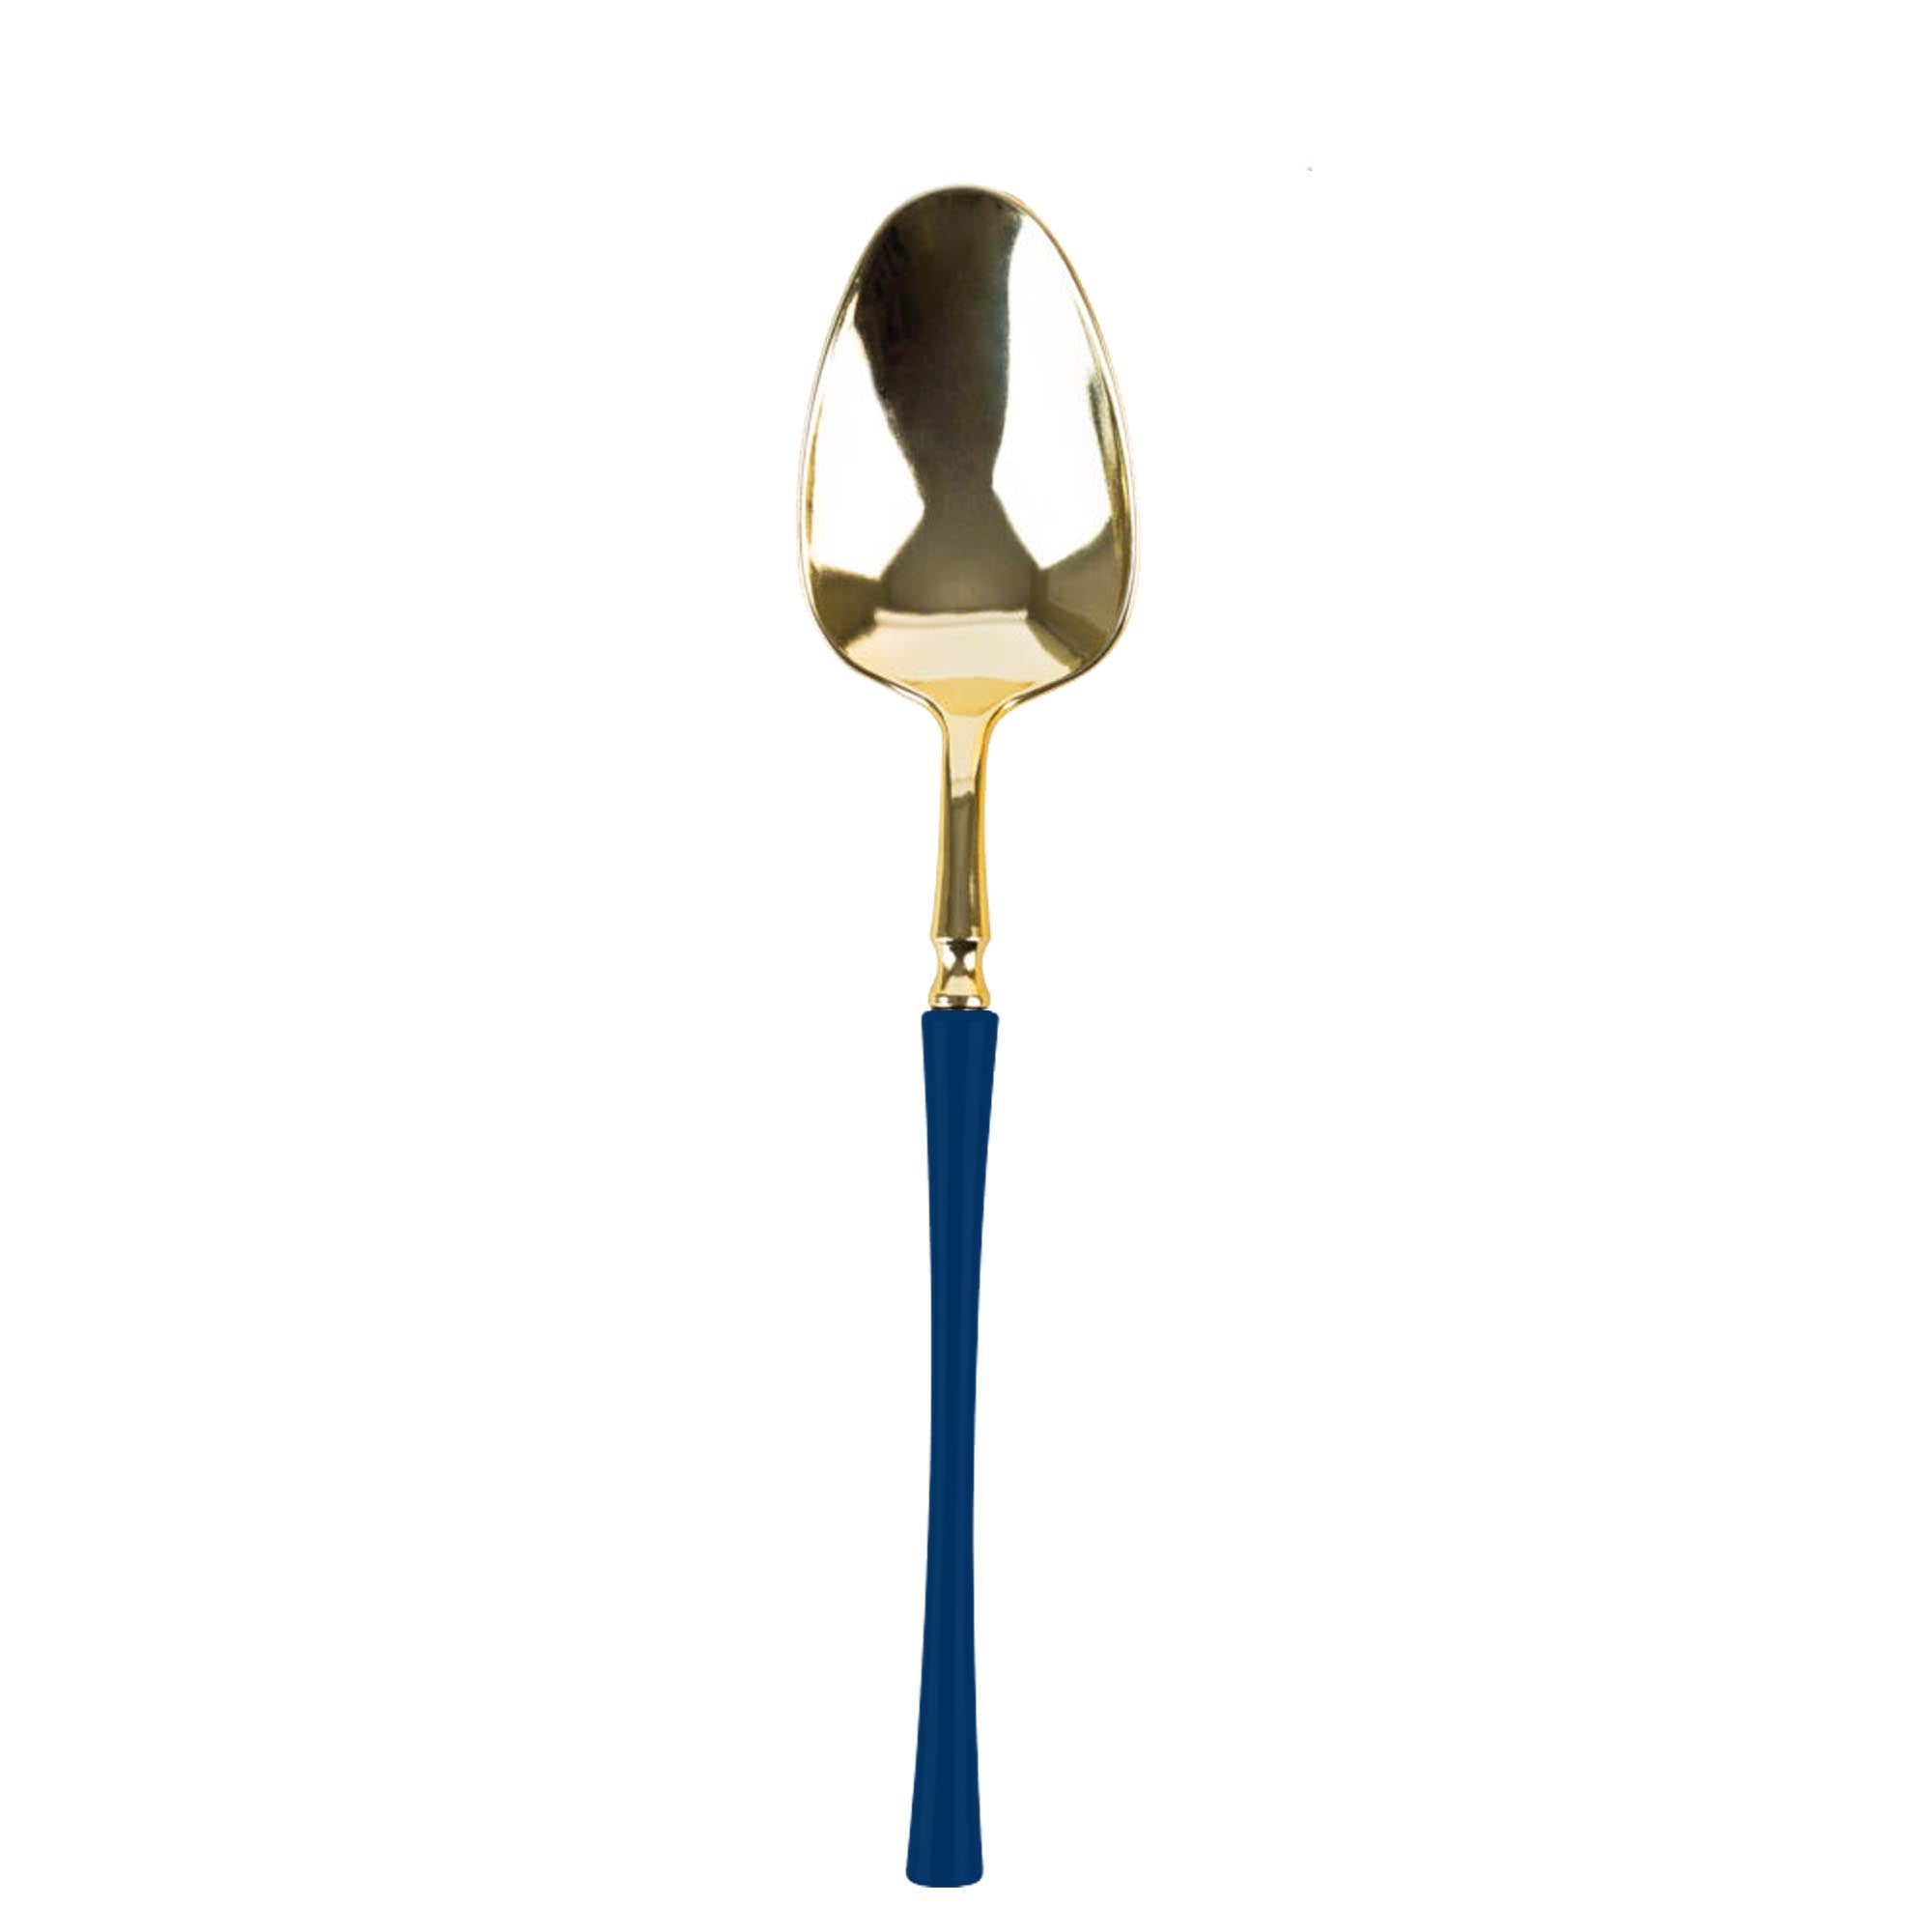 Plastic Soup Spoons Navy Blue and Gold Infinity Flatware Collection